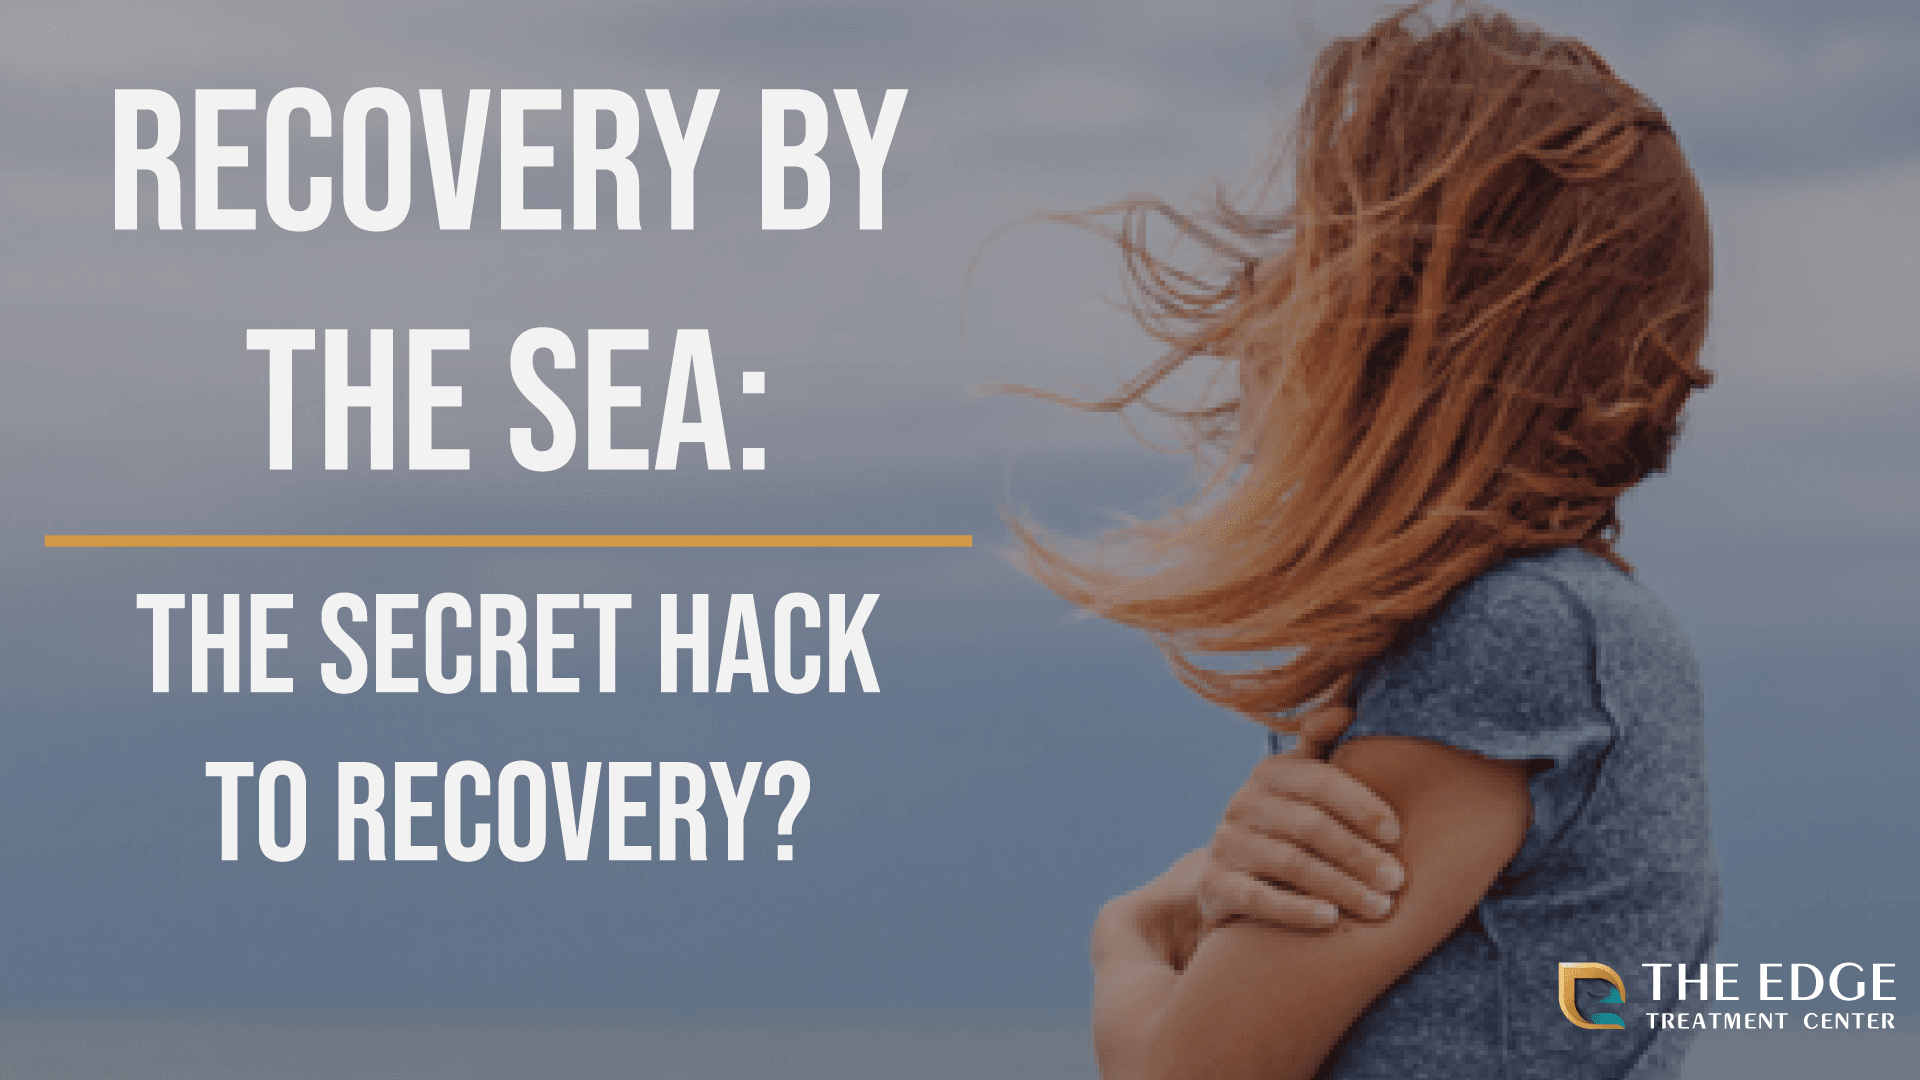 Recovery By The Sea: Facts & More